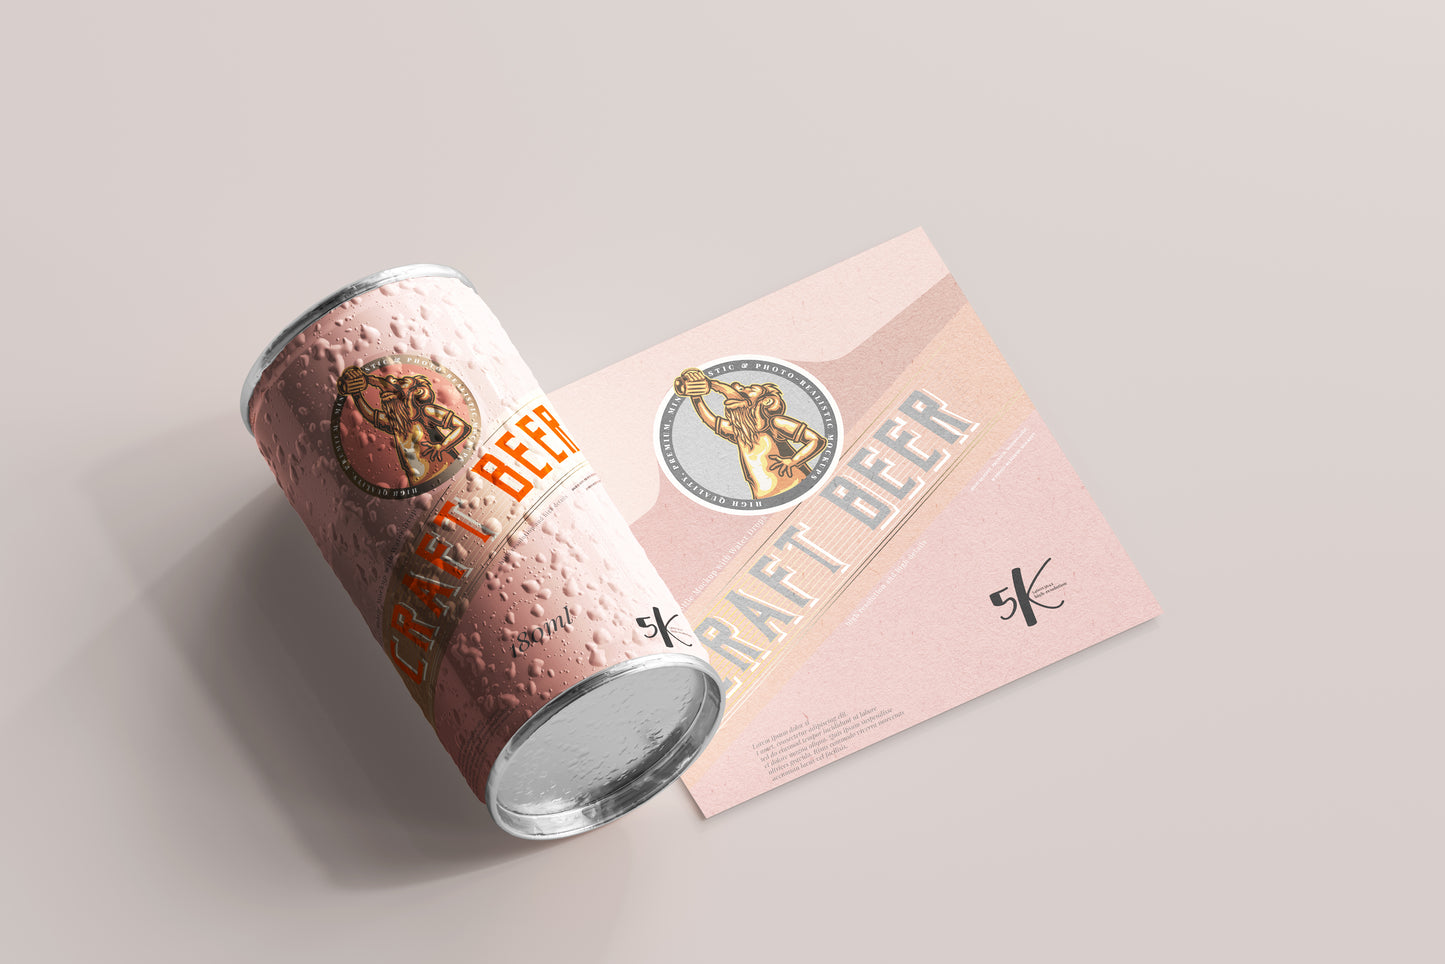 Small Soda or Beer Can Mockup with Condensation Effect